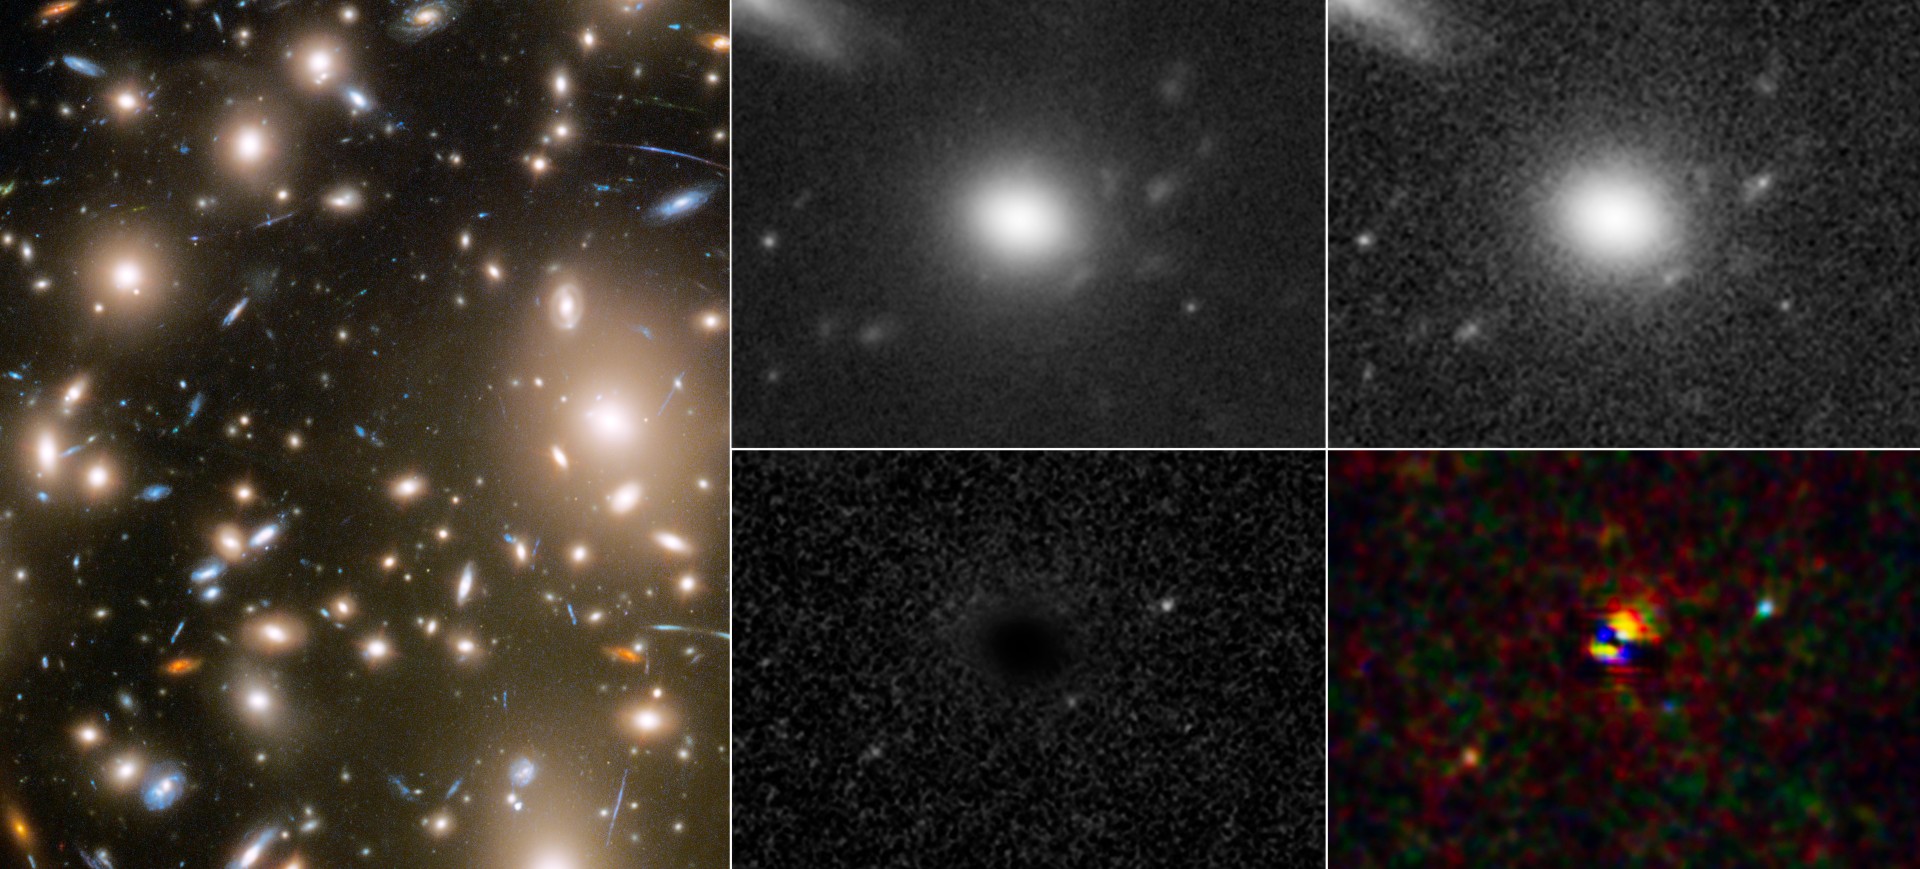 Through a phenomenon called gravitational lensing, three different moments in a far-off supernova explosion were captured in a single snapshot by NASA's Hubble Space Telescope.